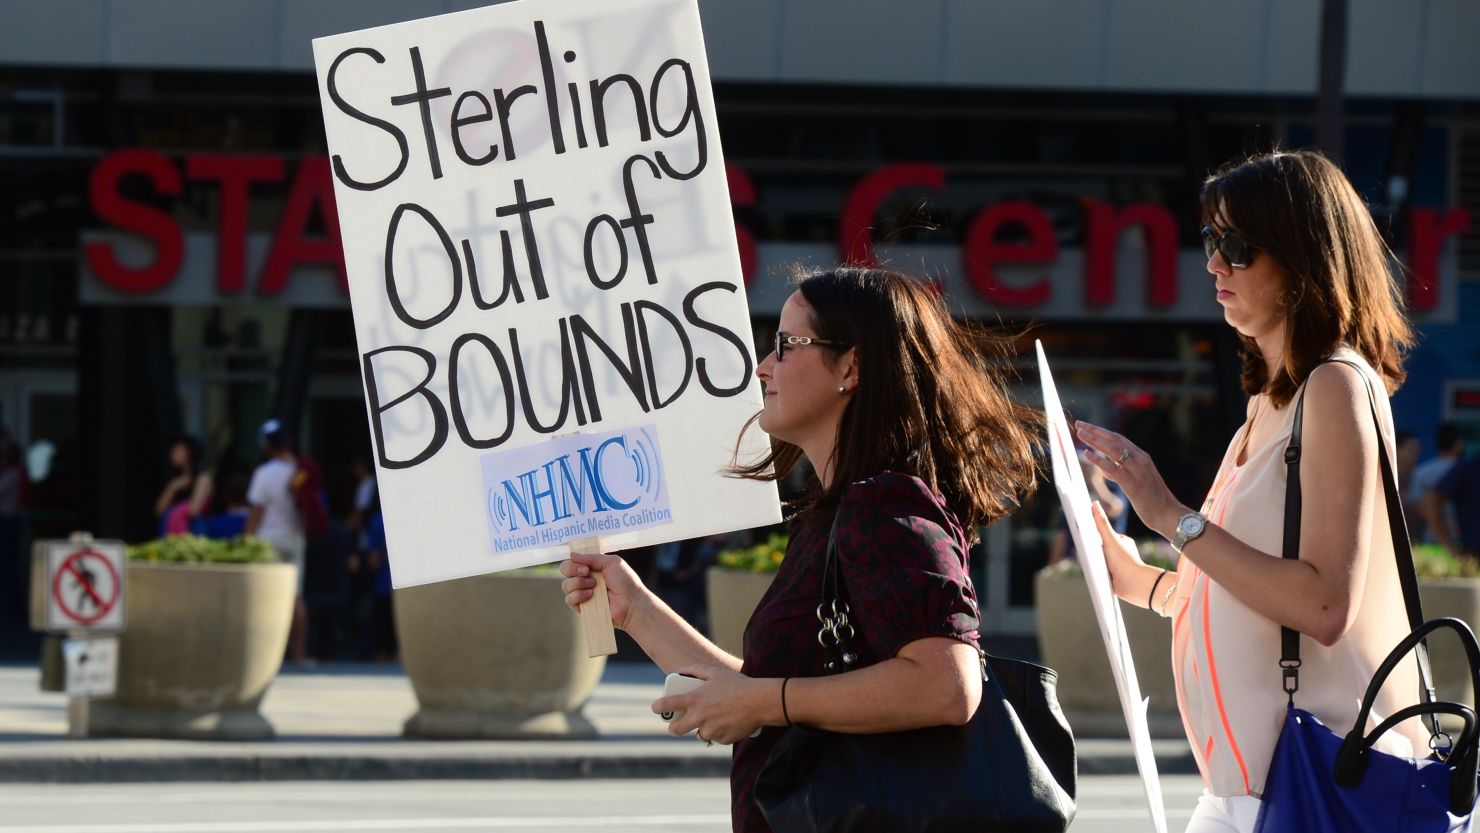 Protesters outside the Staples Center prior to Game 5 of the NBA playoff game between the Los Angeles Clippers and the Golden State Warriors.